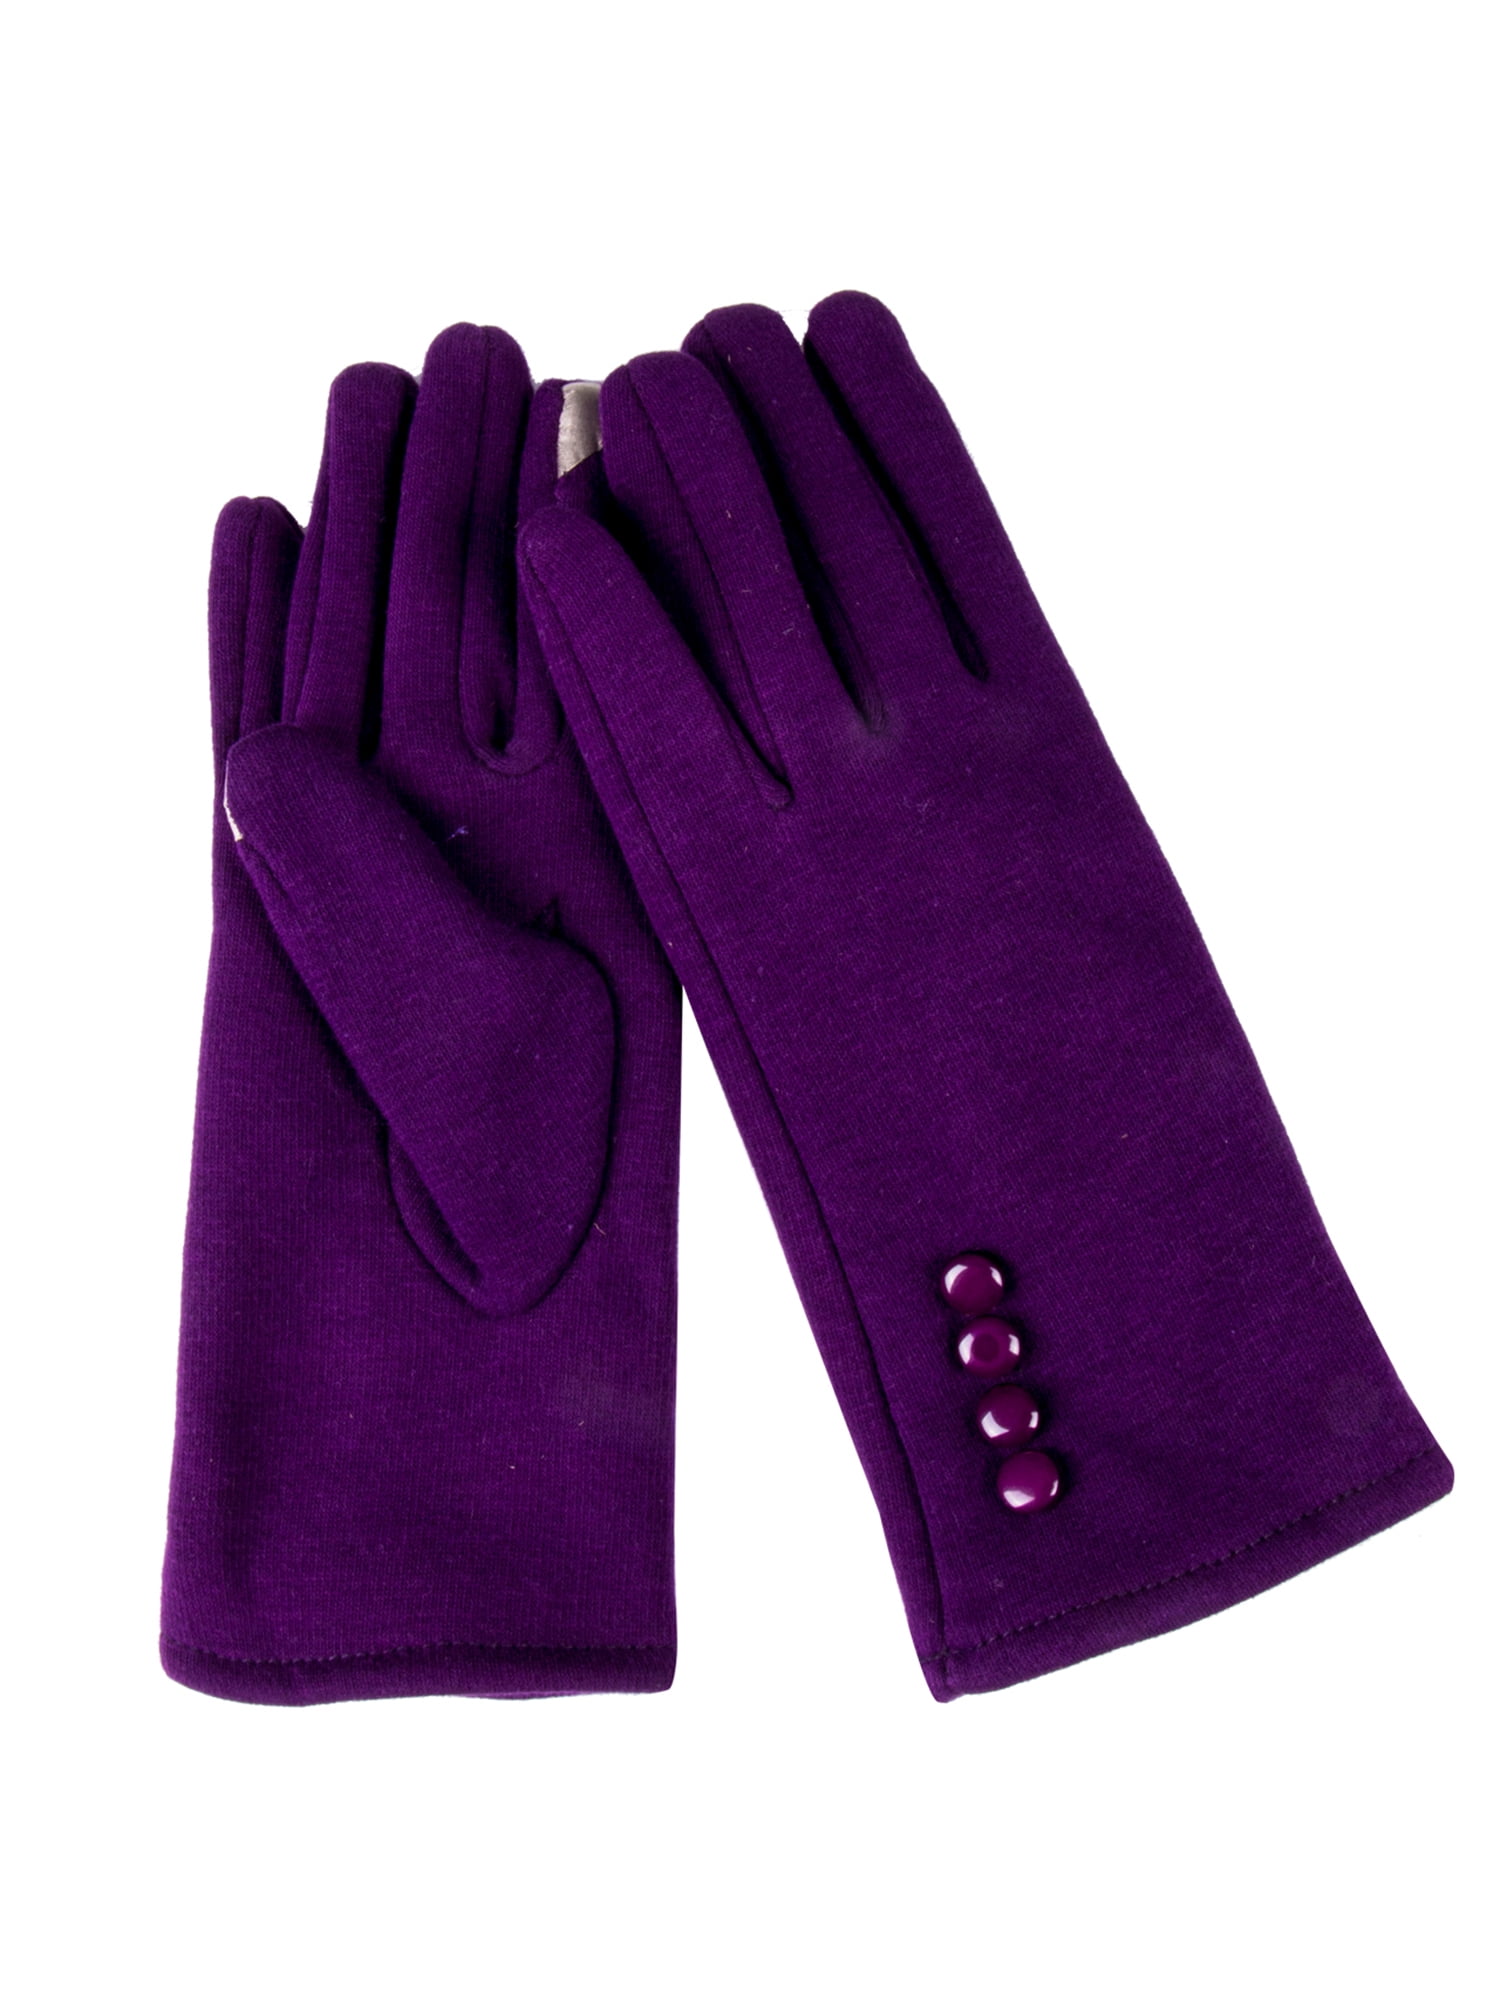 Details about   Women Men Solid Winter Knitted Warm Full Finger Touch Screen Gloves Mittens New 